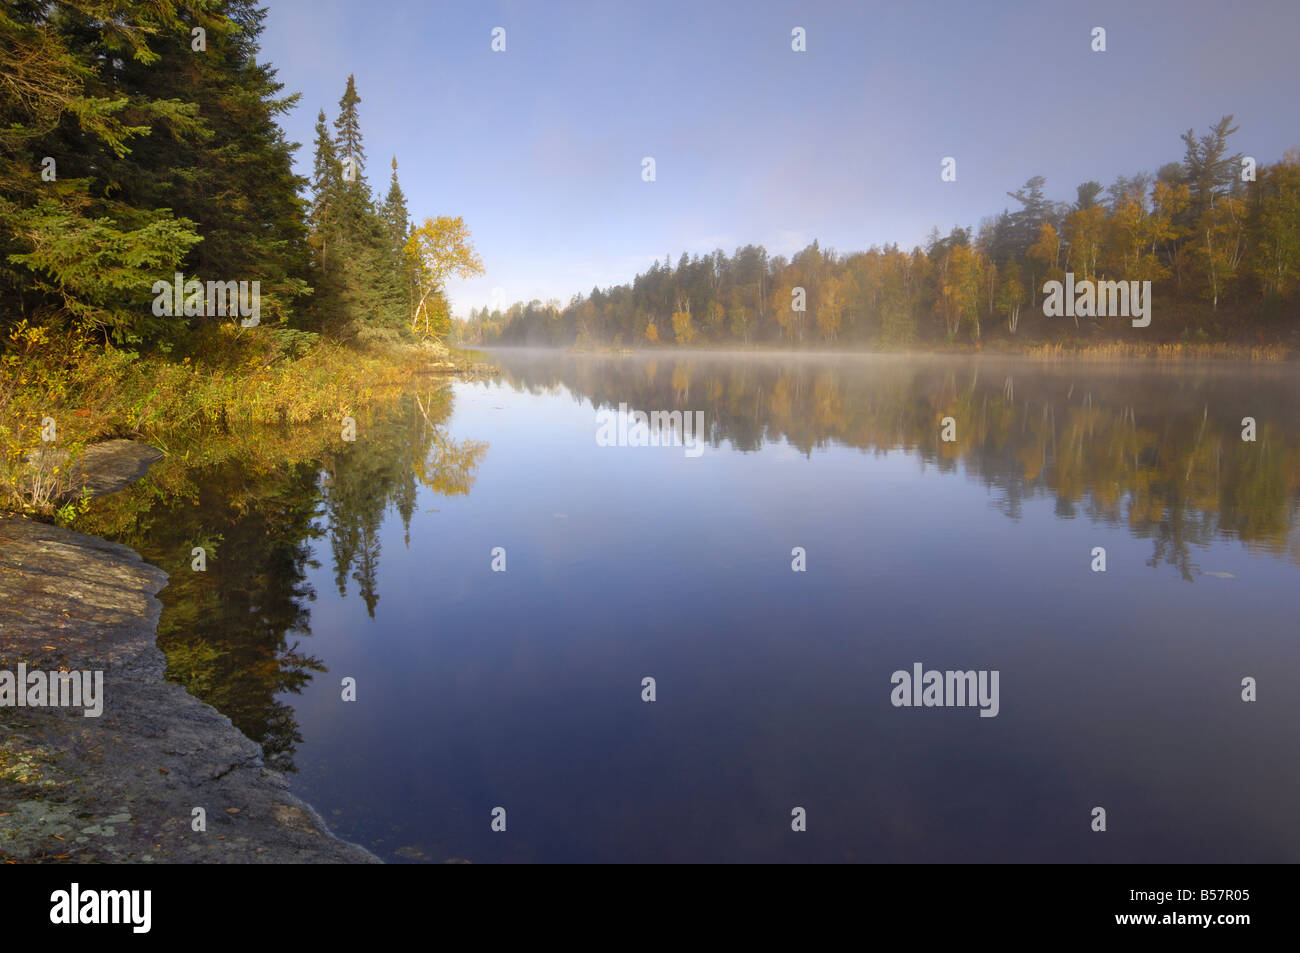 Misty morning on Hoe Lake, Boundary Waters Canoe Area Wilderness, Superior National Forest, Minnesota, United States of America Stock Photo